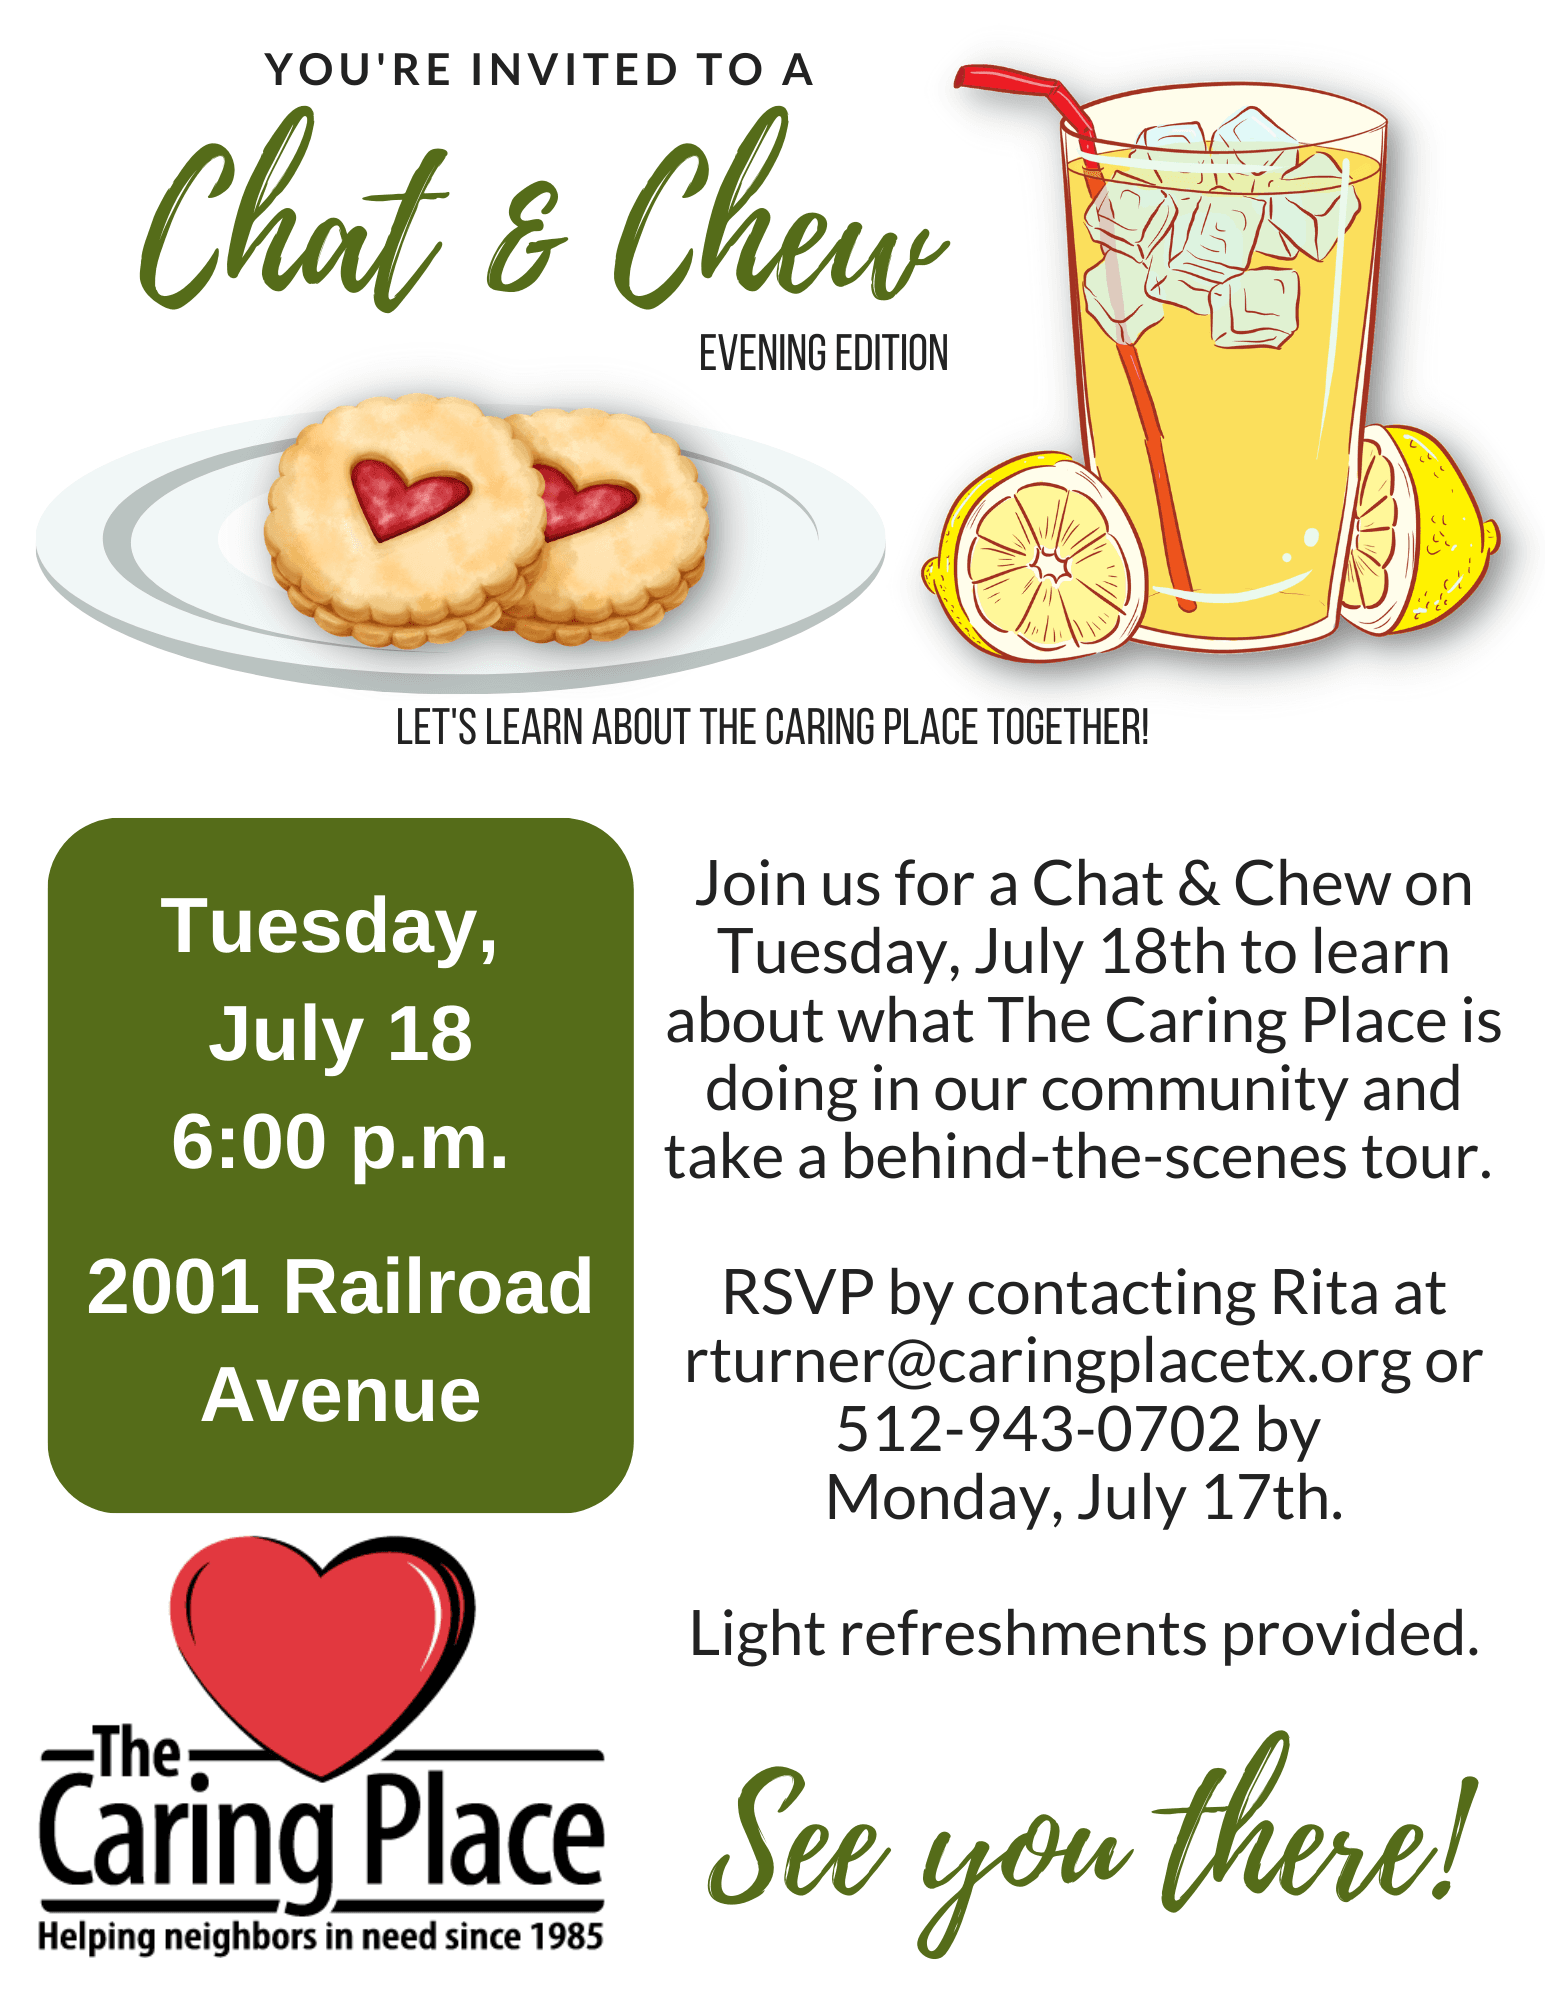 Chat & Chew Evening Edition is Here!